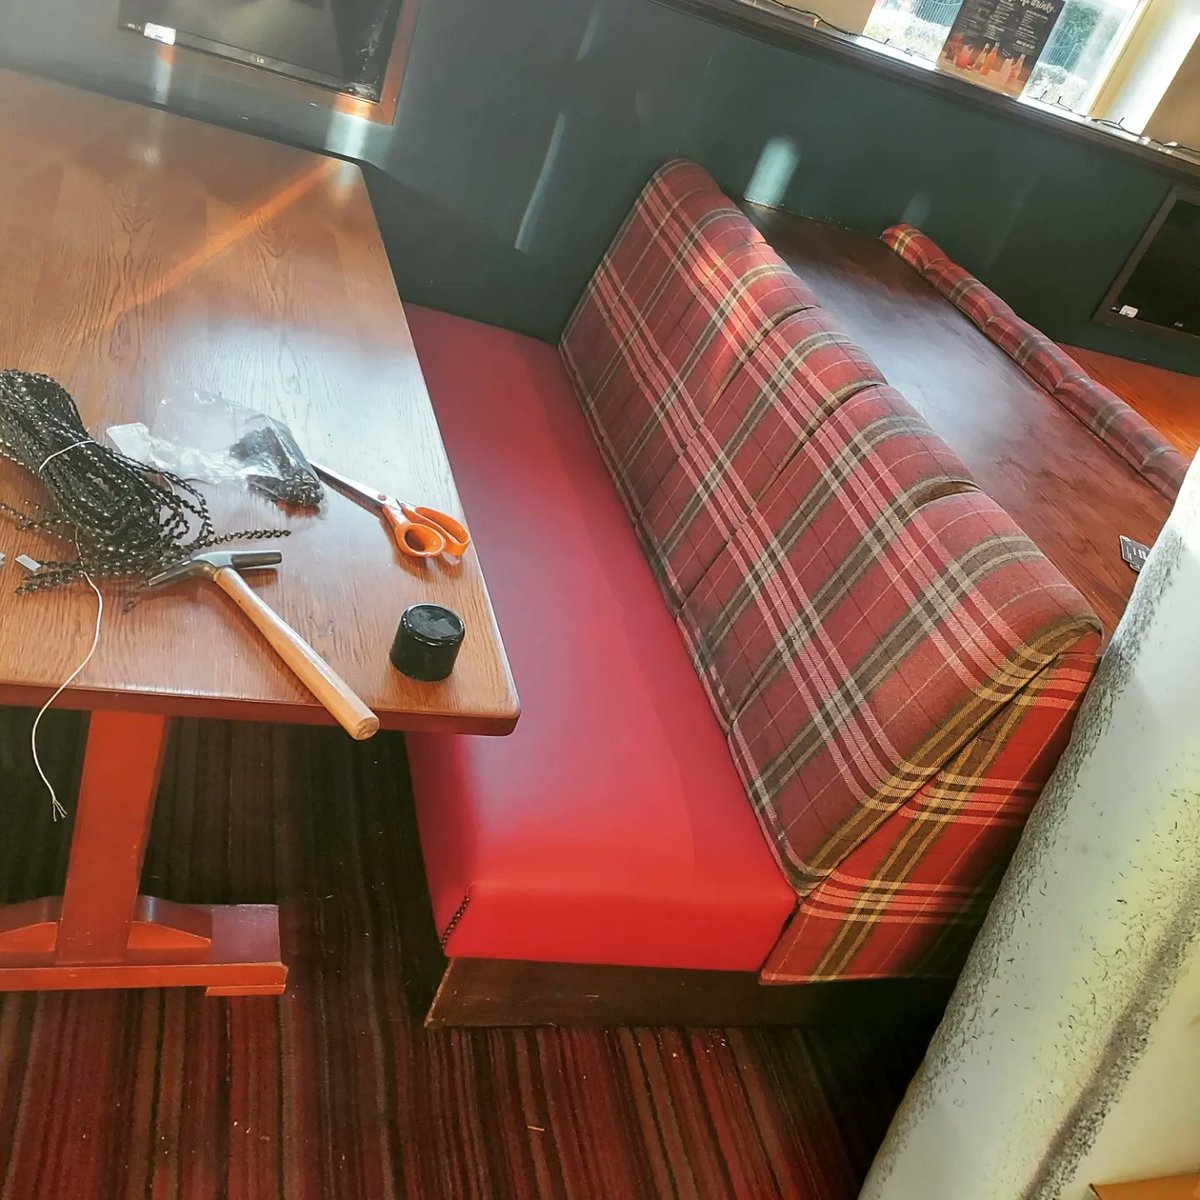 Another on-site seating repaired while you wait, we come to your pub, restaurant, club, cafe or house etc and we will repair your damaged seating anywhere in the UK #bar #restaurant #club #cafe #seating #benchseating #upholstery